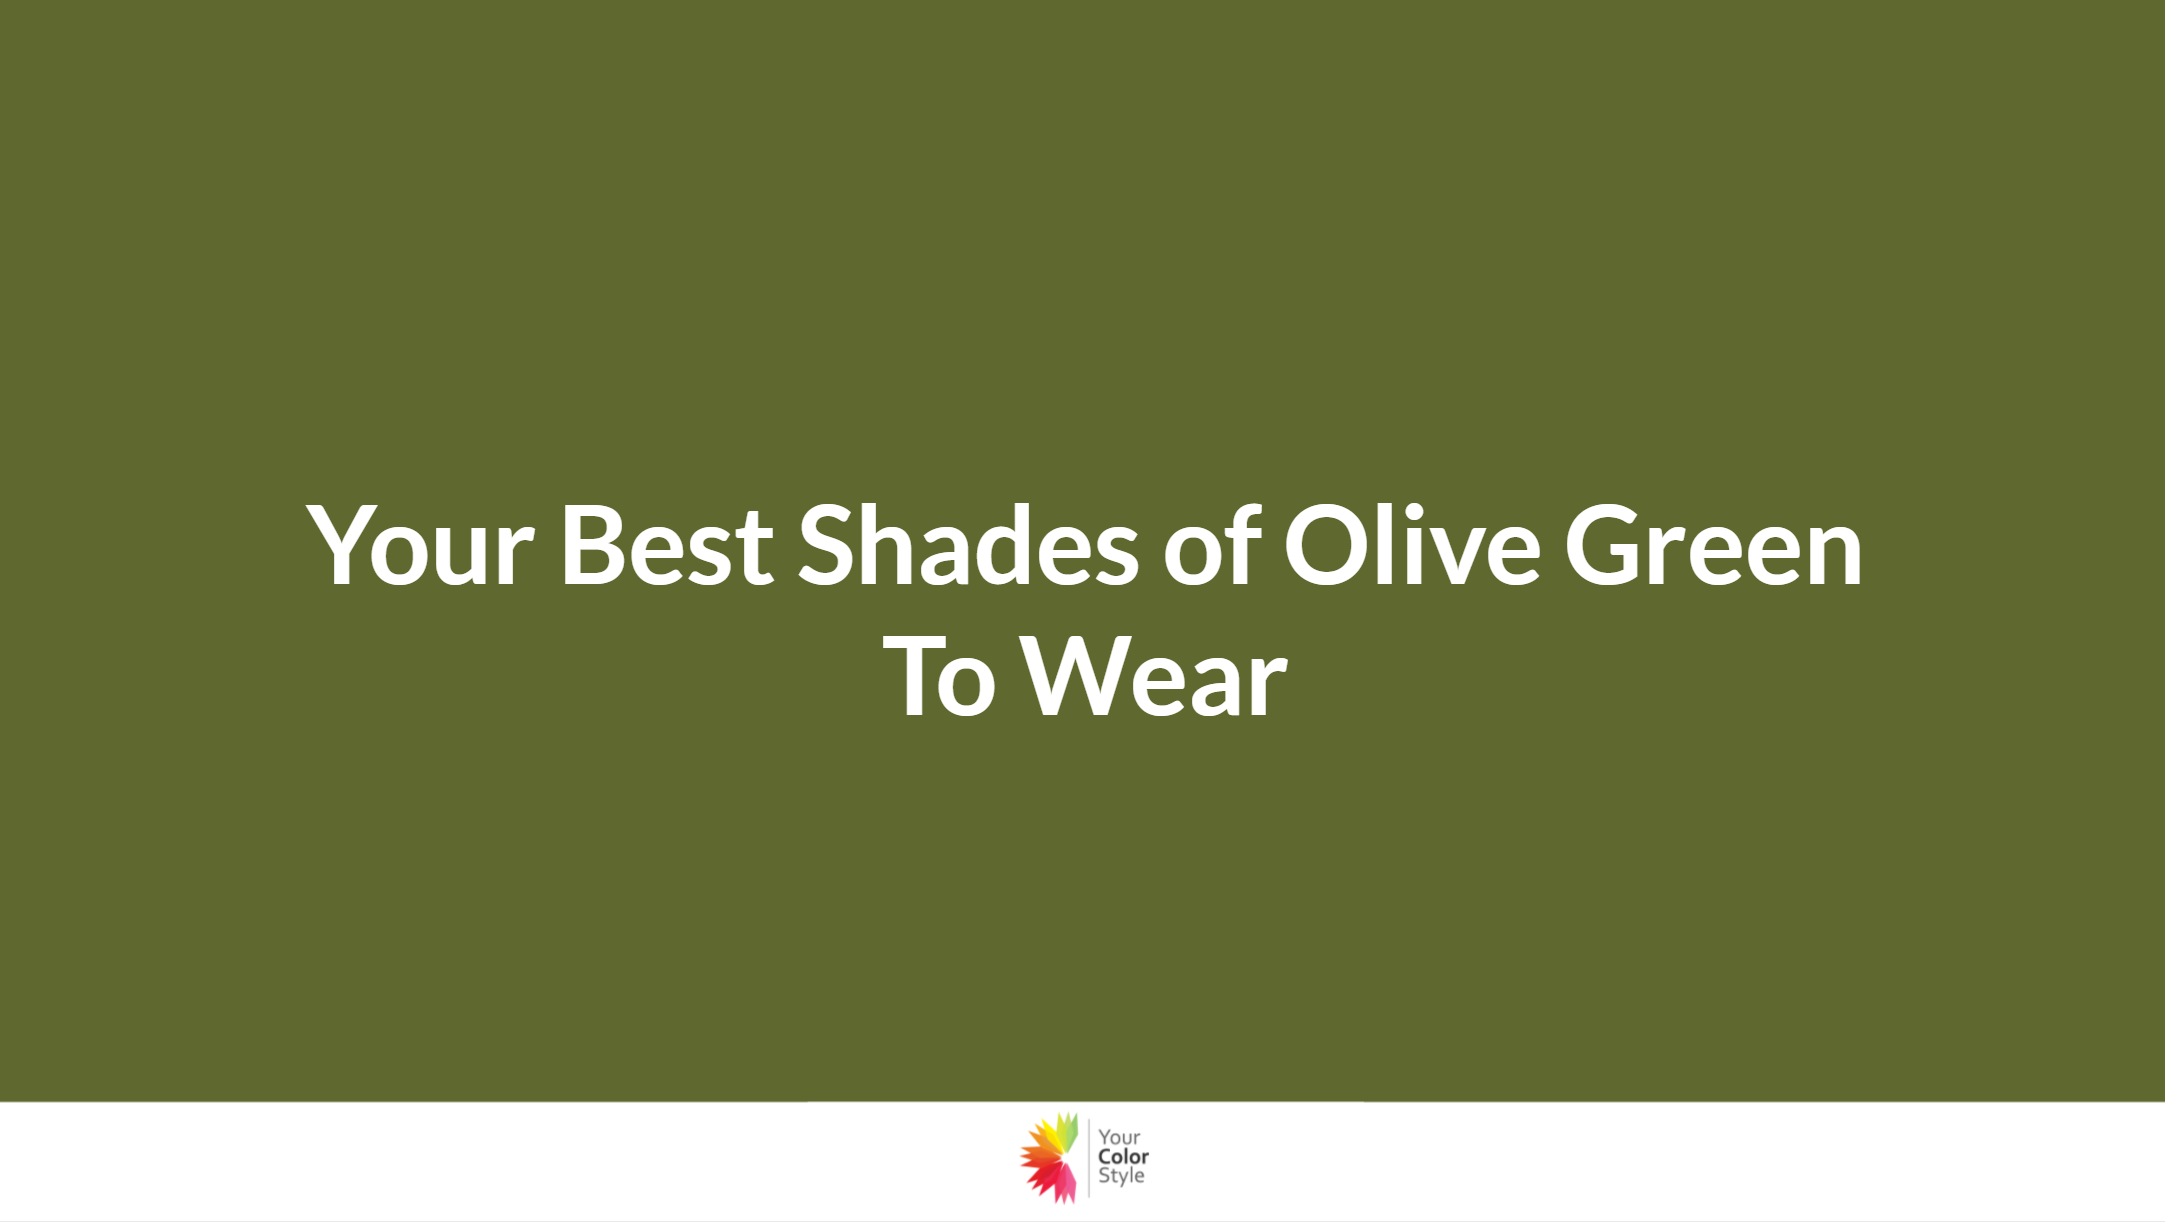 Your Best Shades of Olive Green to Wear